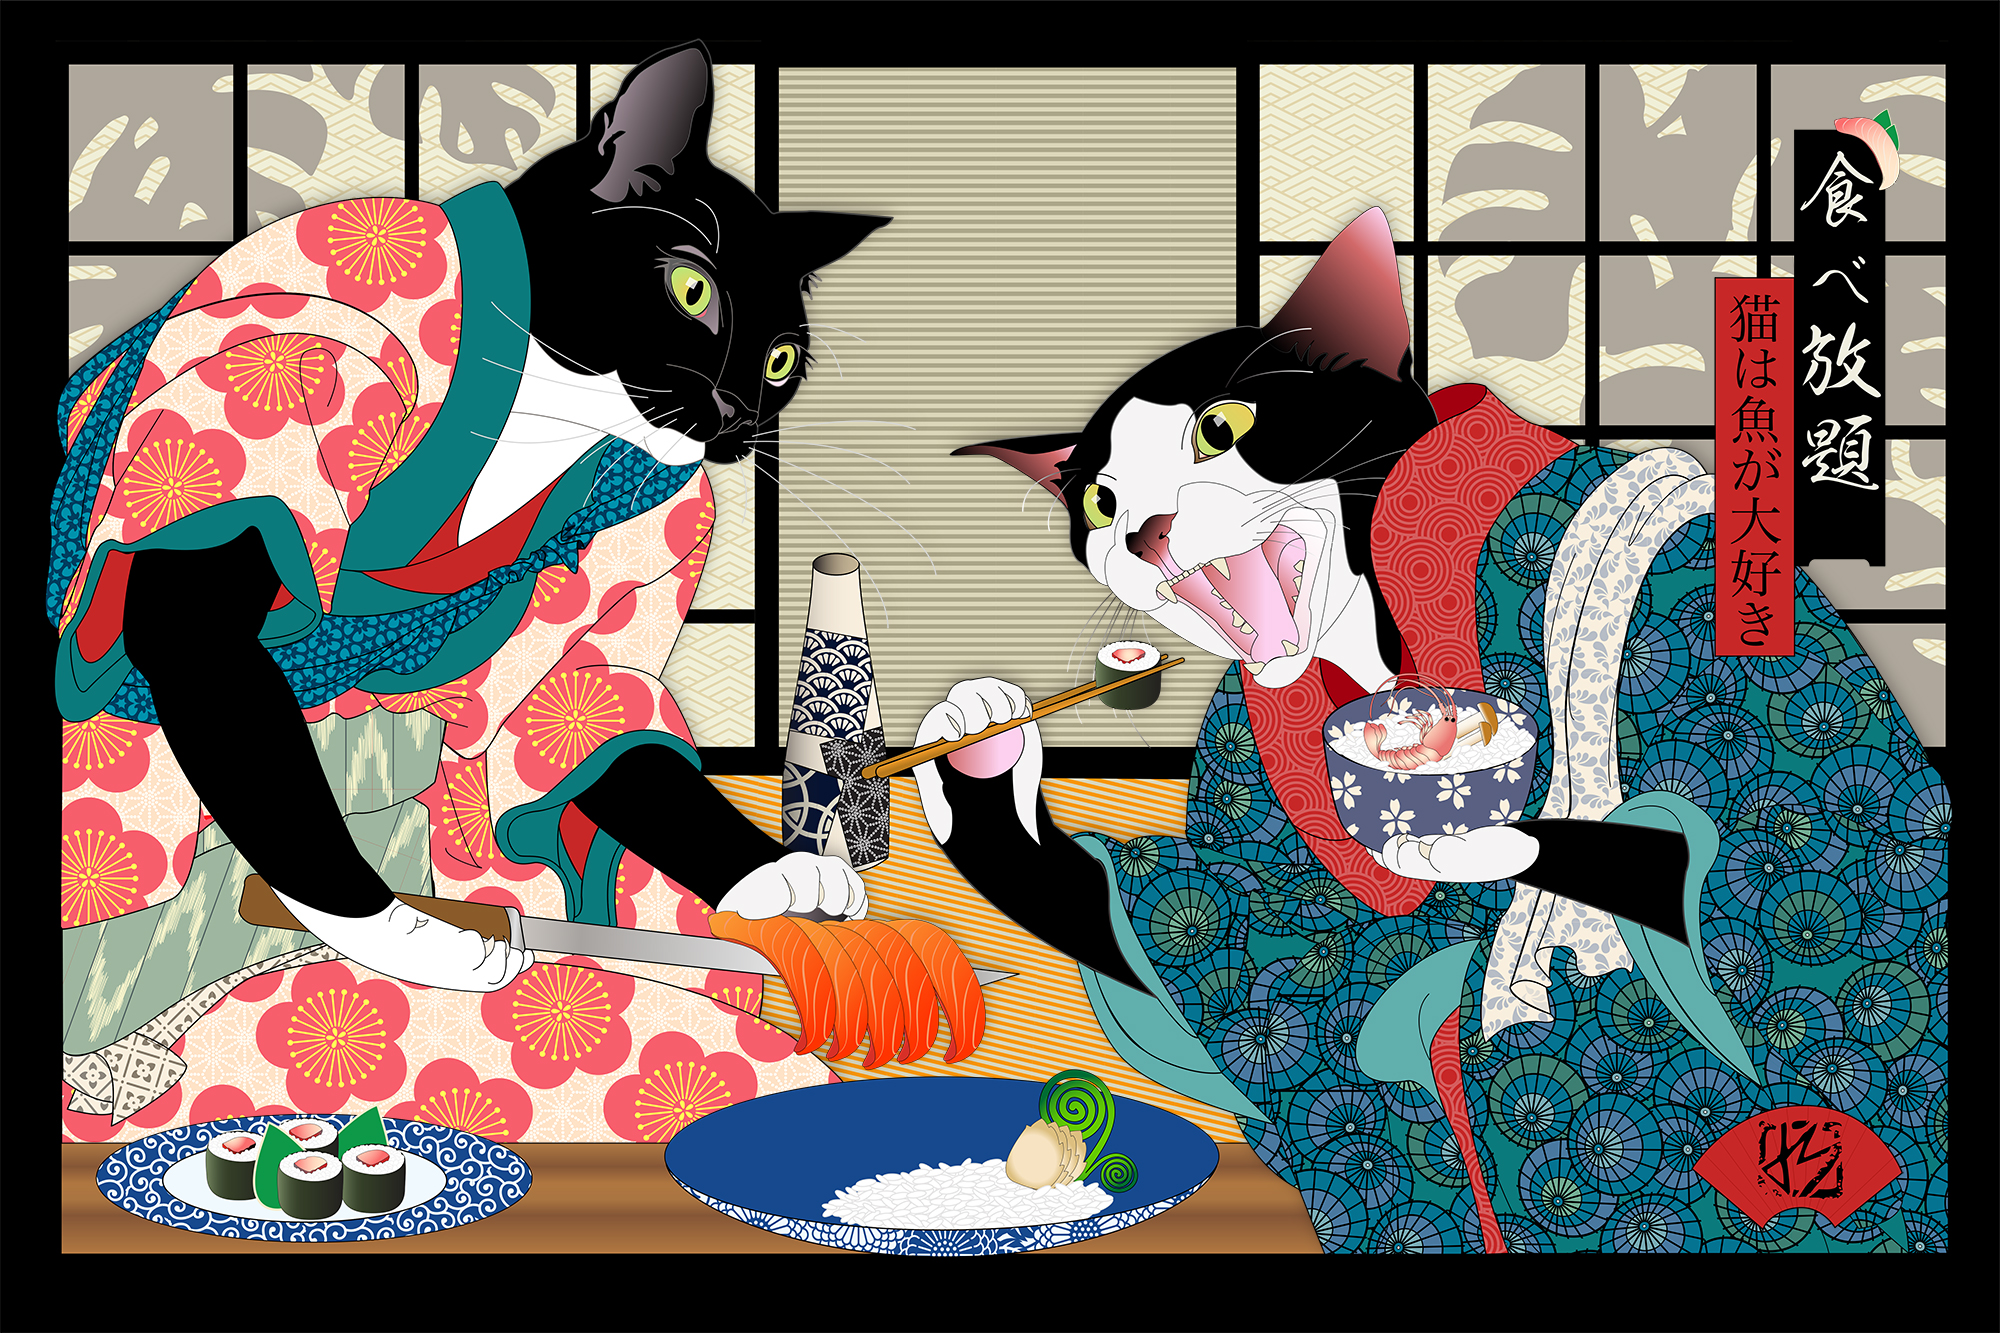 Two cats joyfully consume a sushi dinner